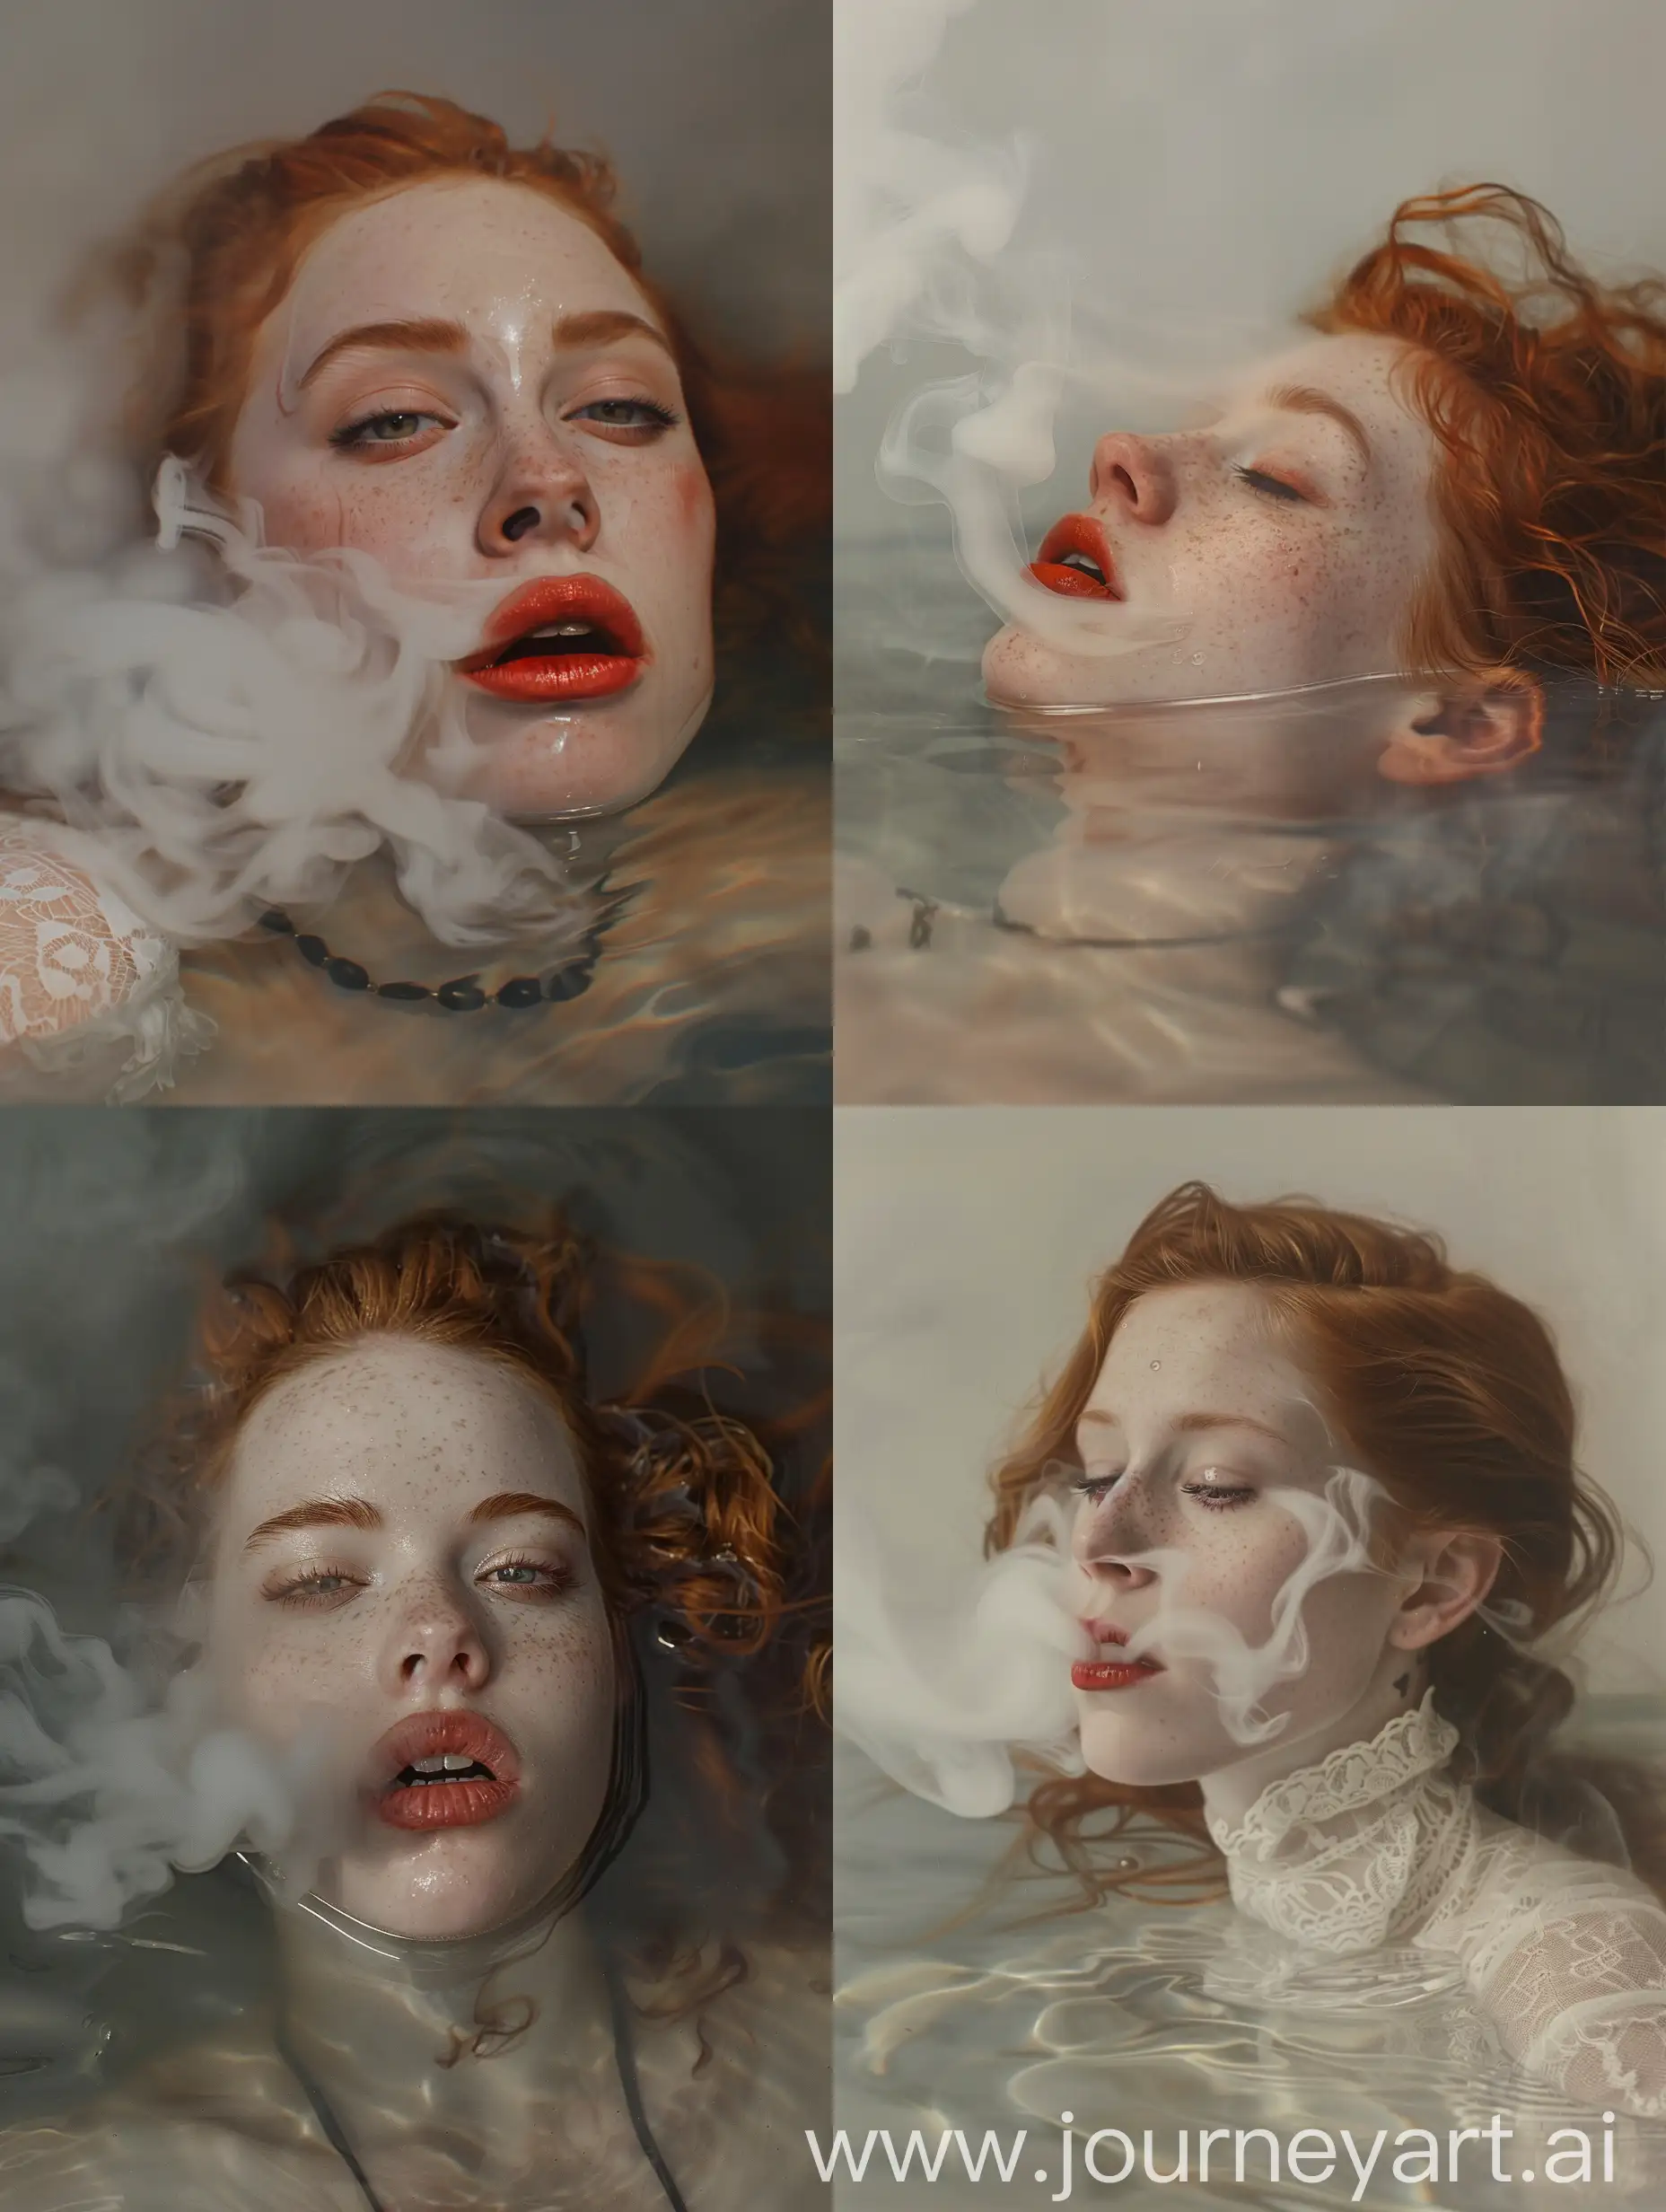 hyperrealism, portrait, foggy, redhead girl, porcelain skin, laying in water, heavy smoke drifting from mouth